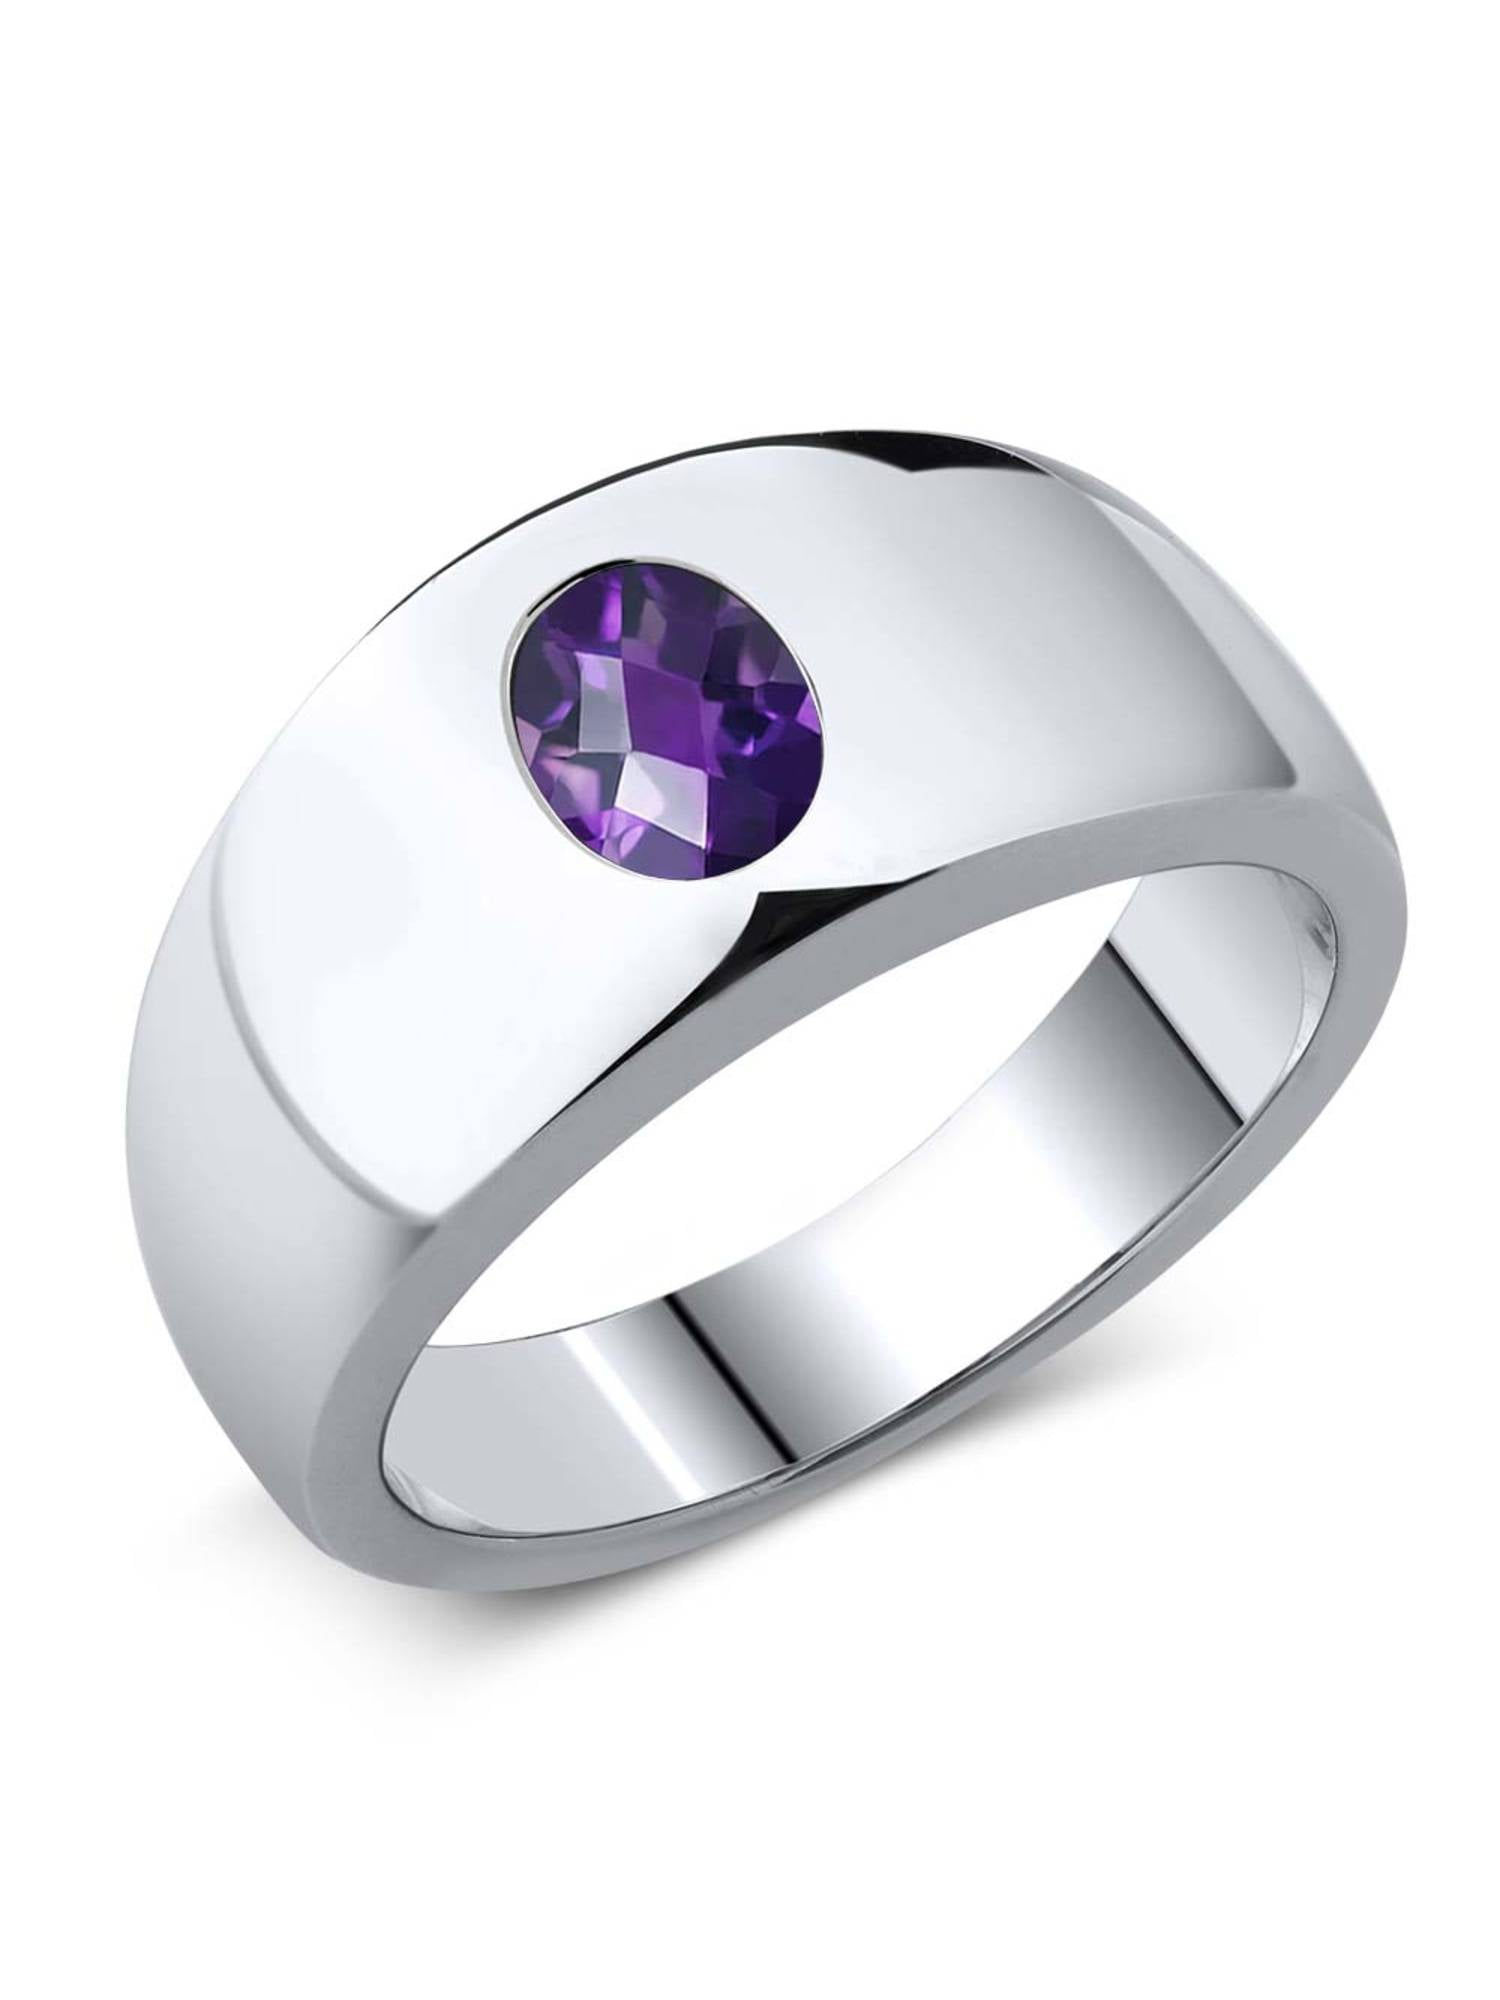 1.42 Ct Oval Checkerboard Purple Amethyst 925 Sterling Silver Ring 